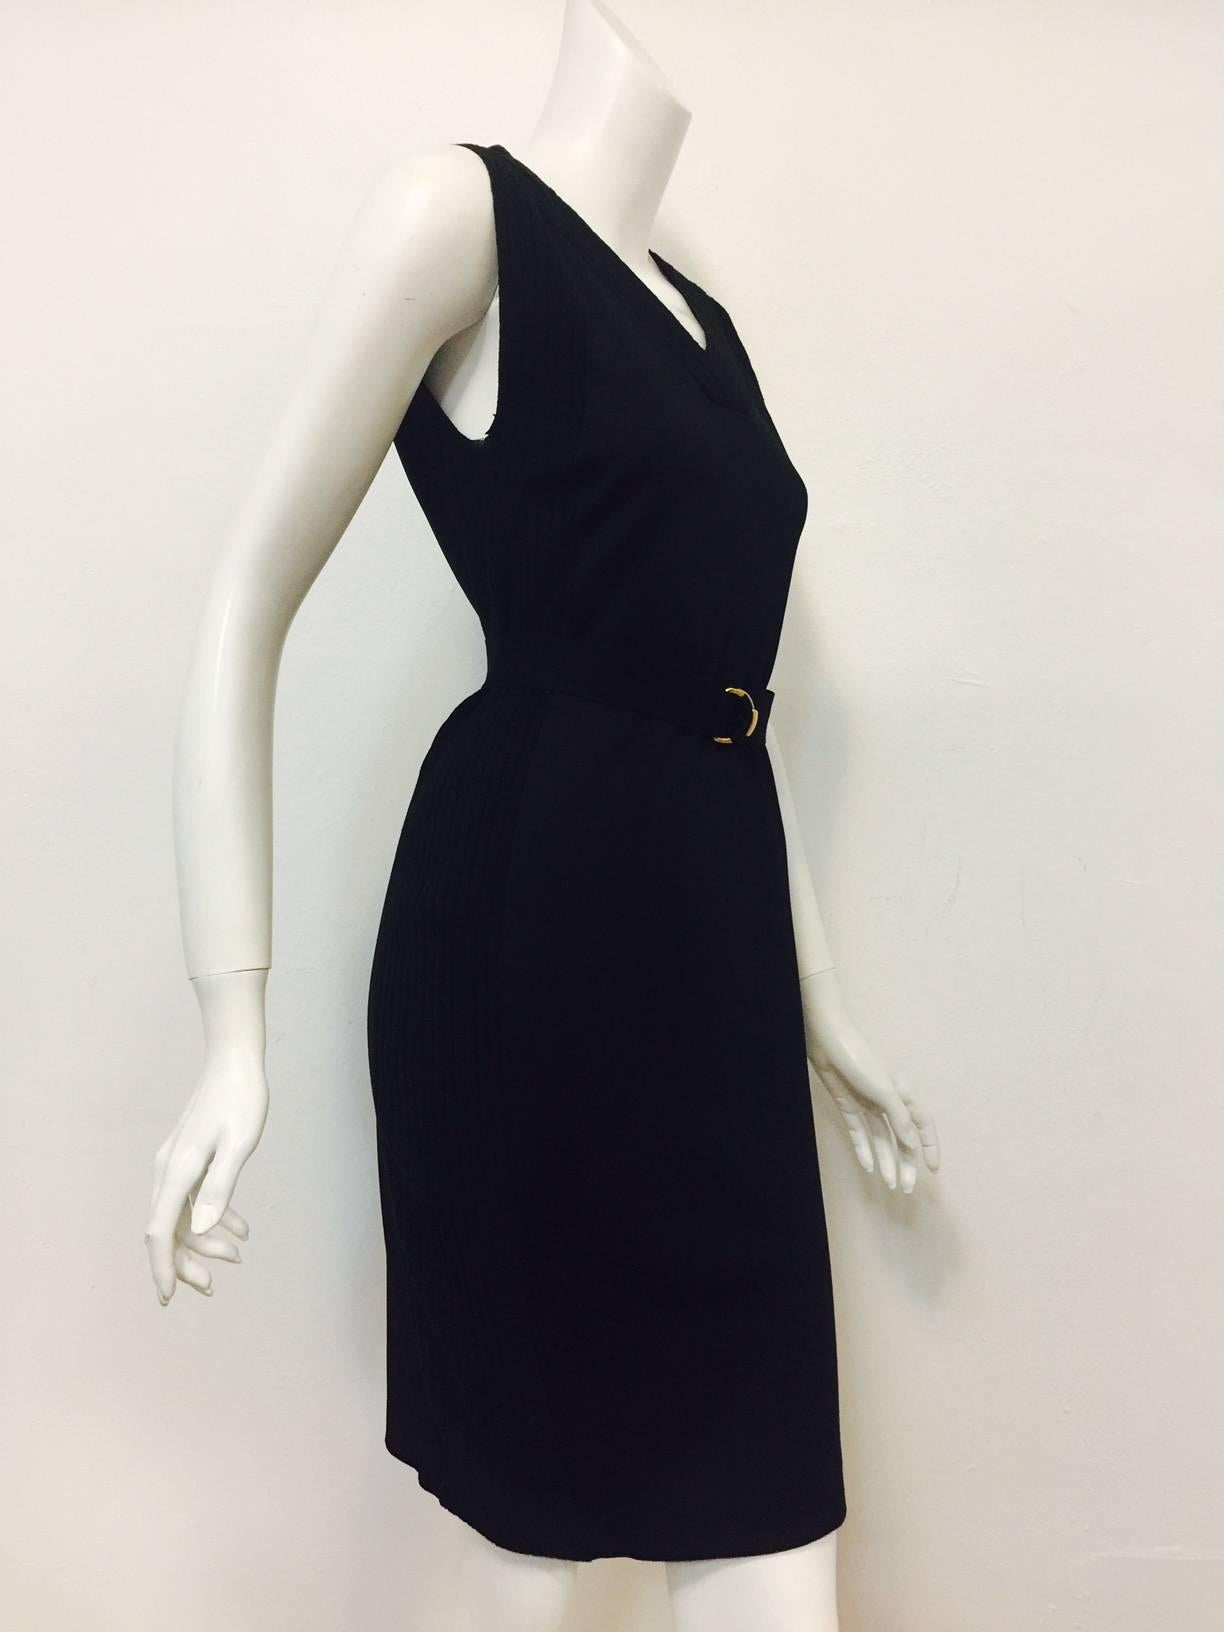 It's not secret that Gucci is glorious again!  This Black Viscose and Wool Blend Sheath is perfect for transitioning into fall and works equally well in Milan, Paris, New York and London!  Sleeveless dress features travel-friendly viscose blend body